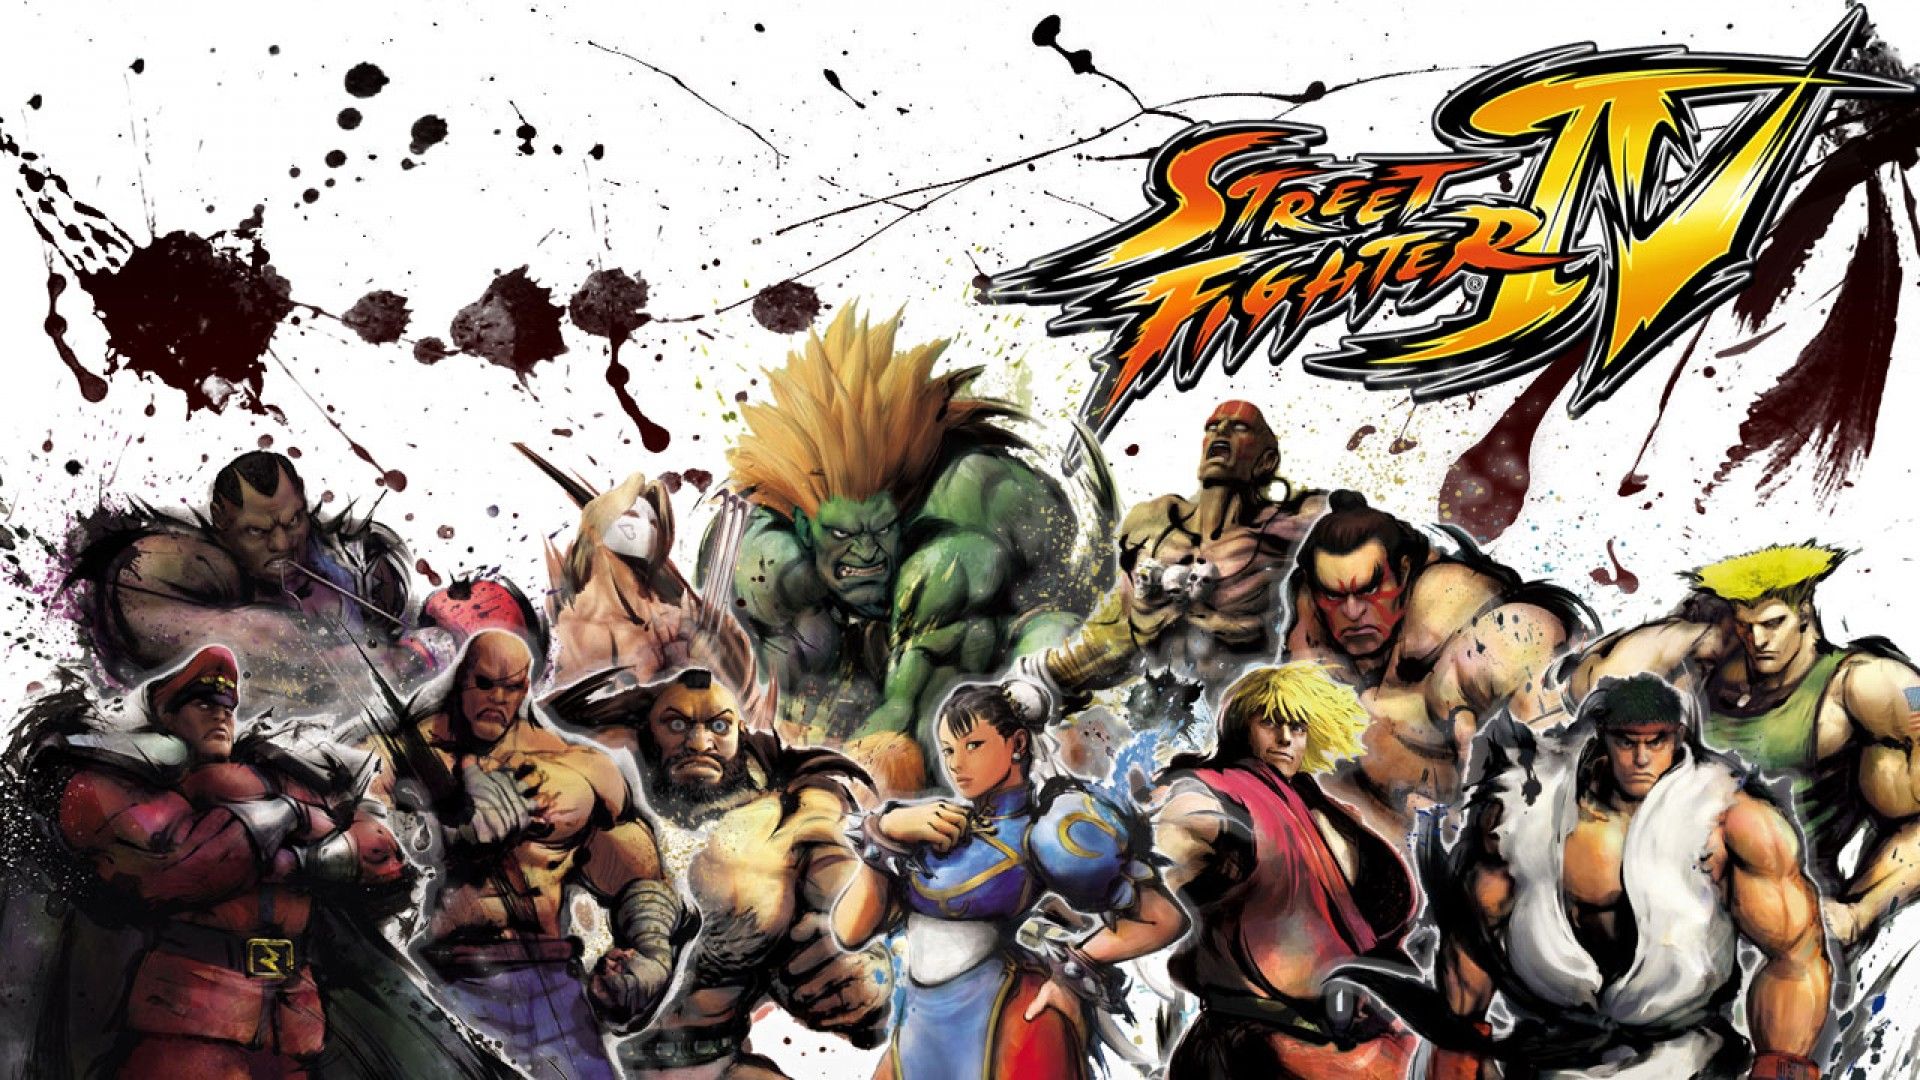 Street Fighter Wallpapers HD - Wallpaper Cave